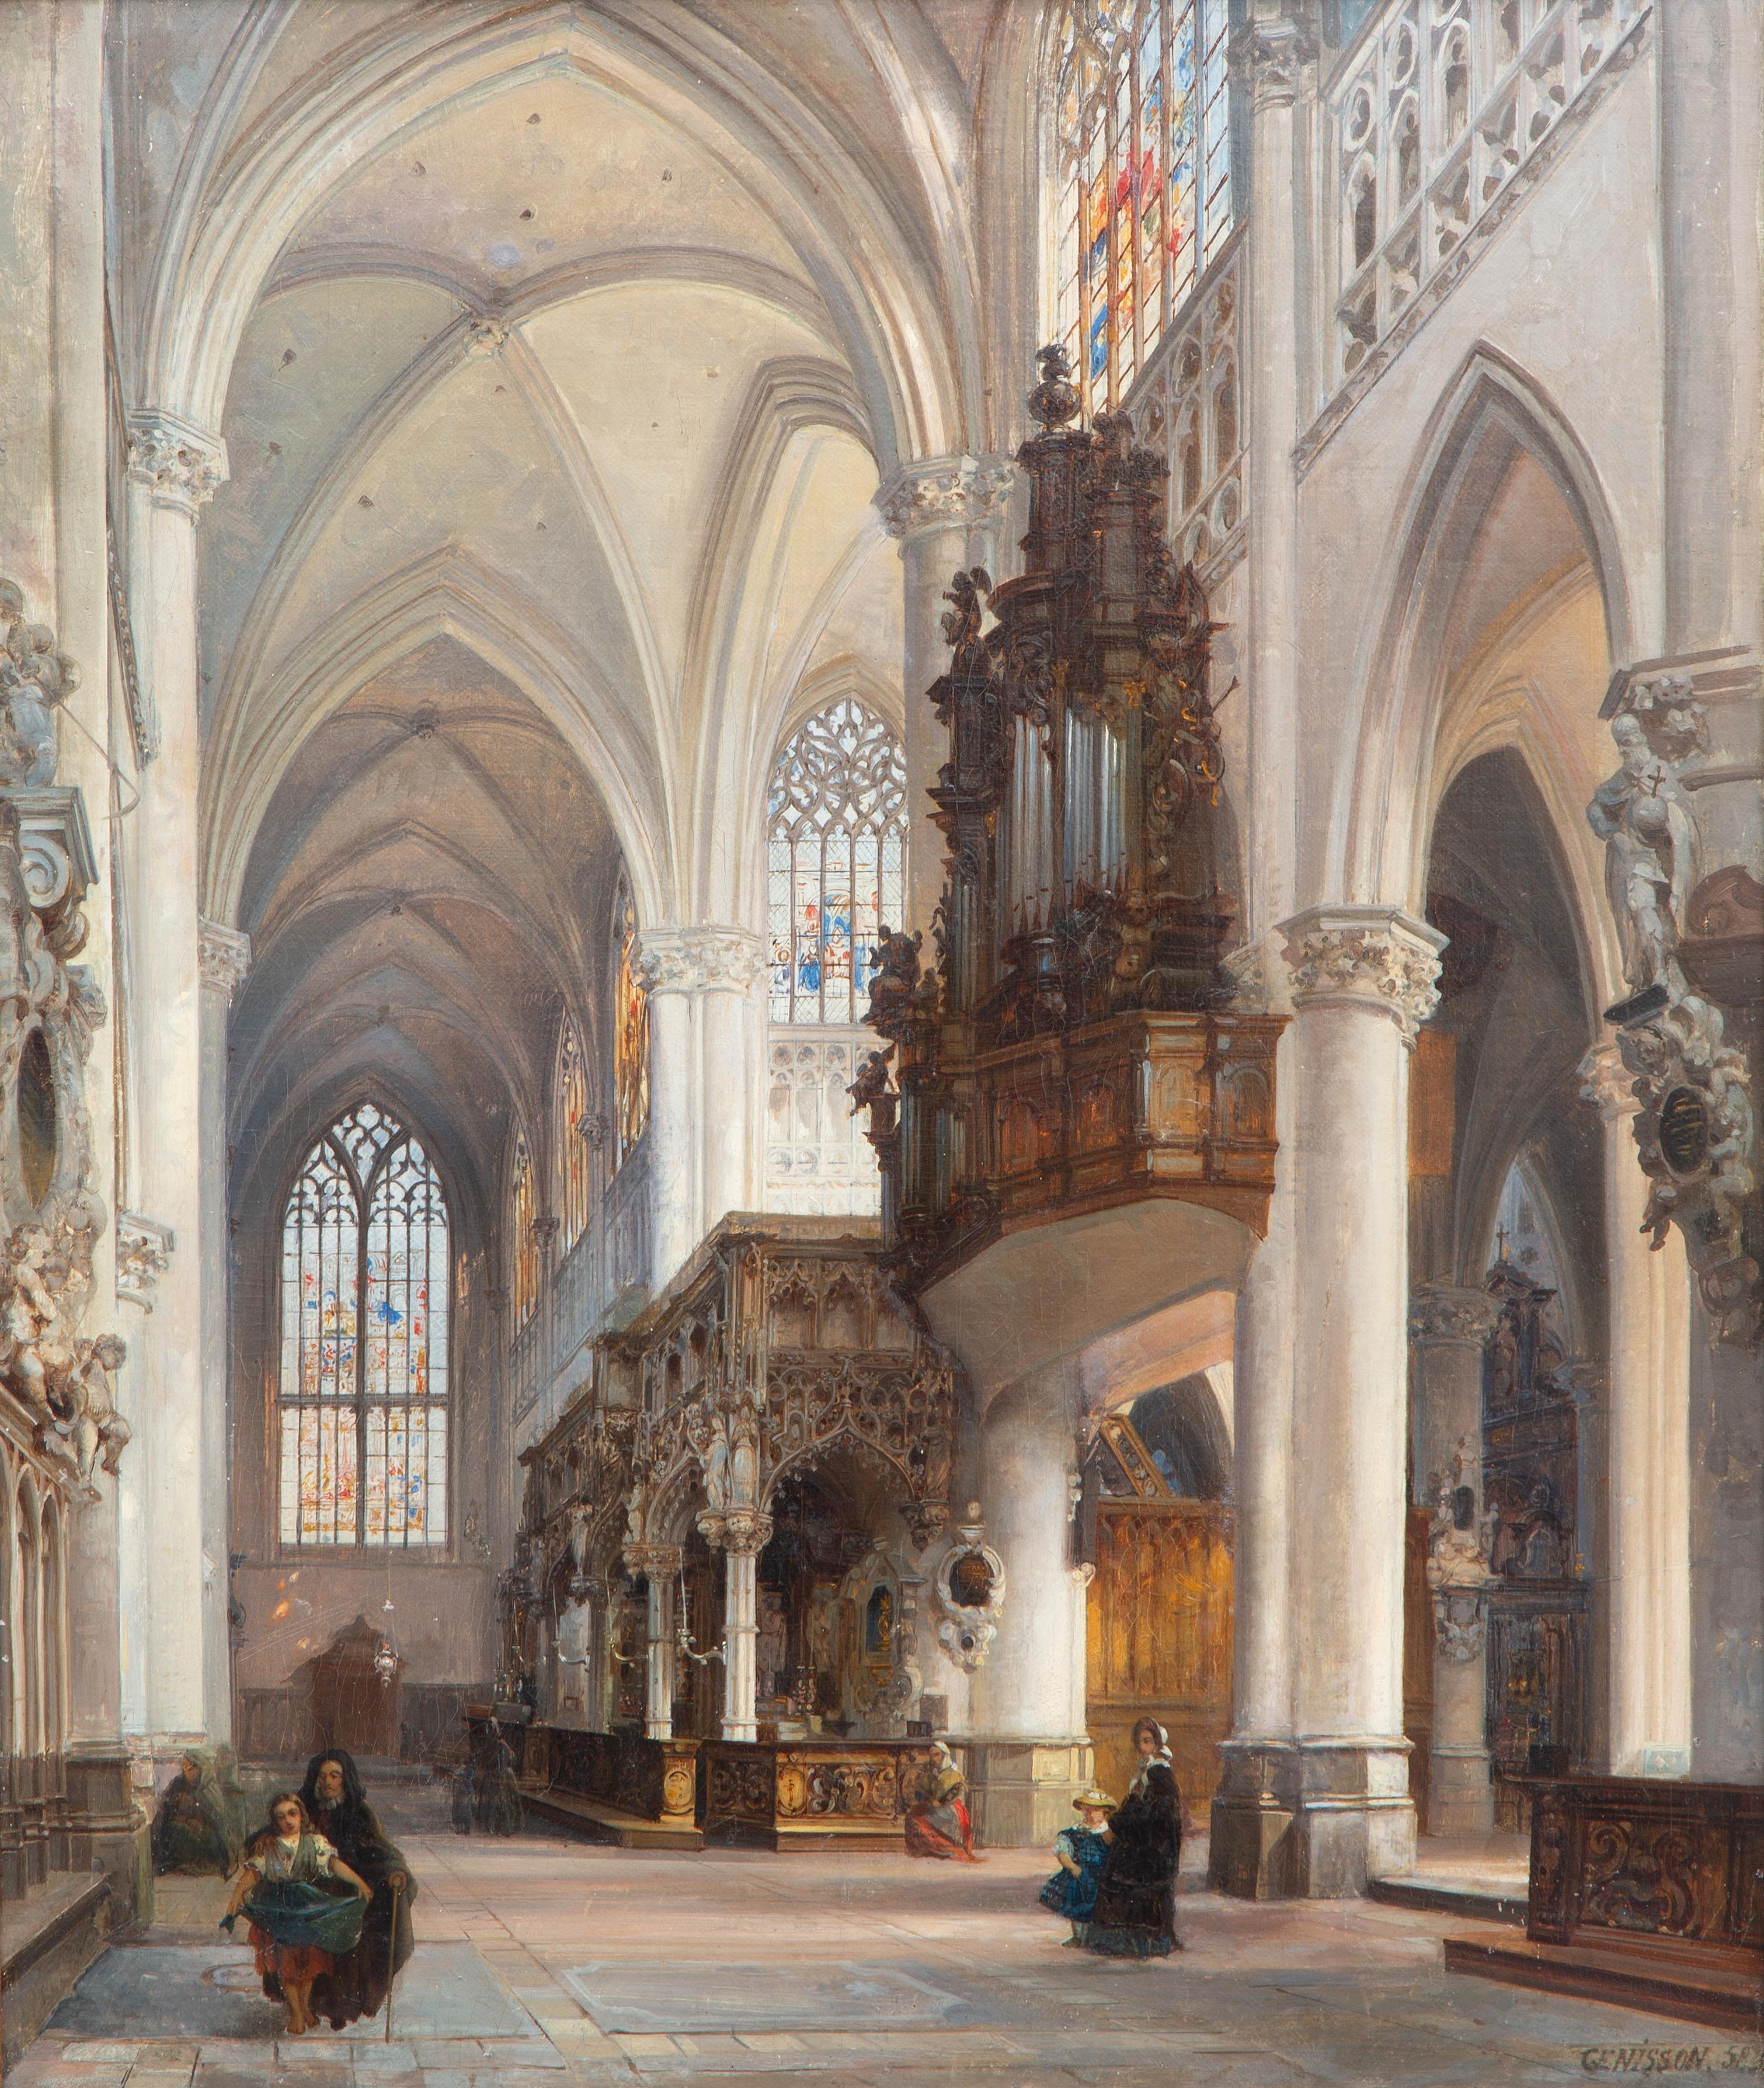 The interior of the St. Gummarus church of Lier, Belgium by Jules Victor Genisson, 1858